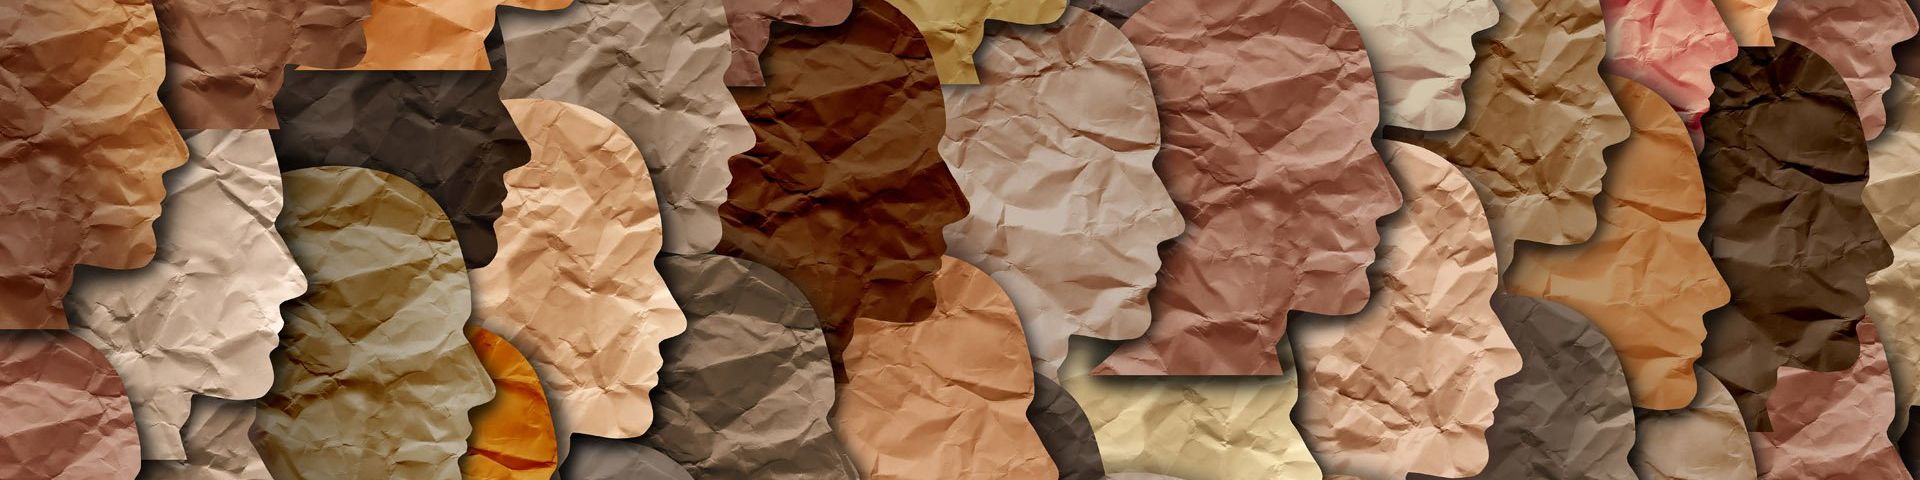 Featureless, slightly crumpled paper faces of all different skin tones, facing right and overlaid onto each other in a collage style